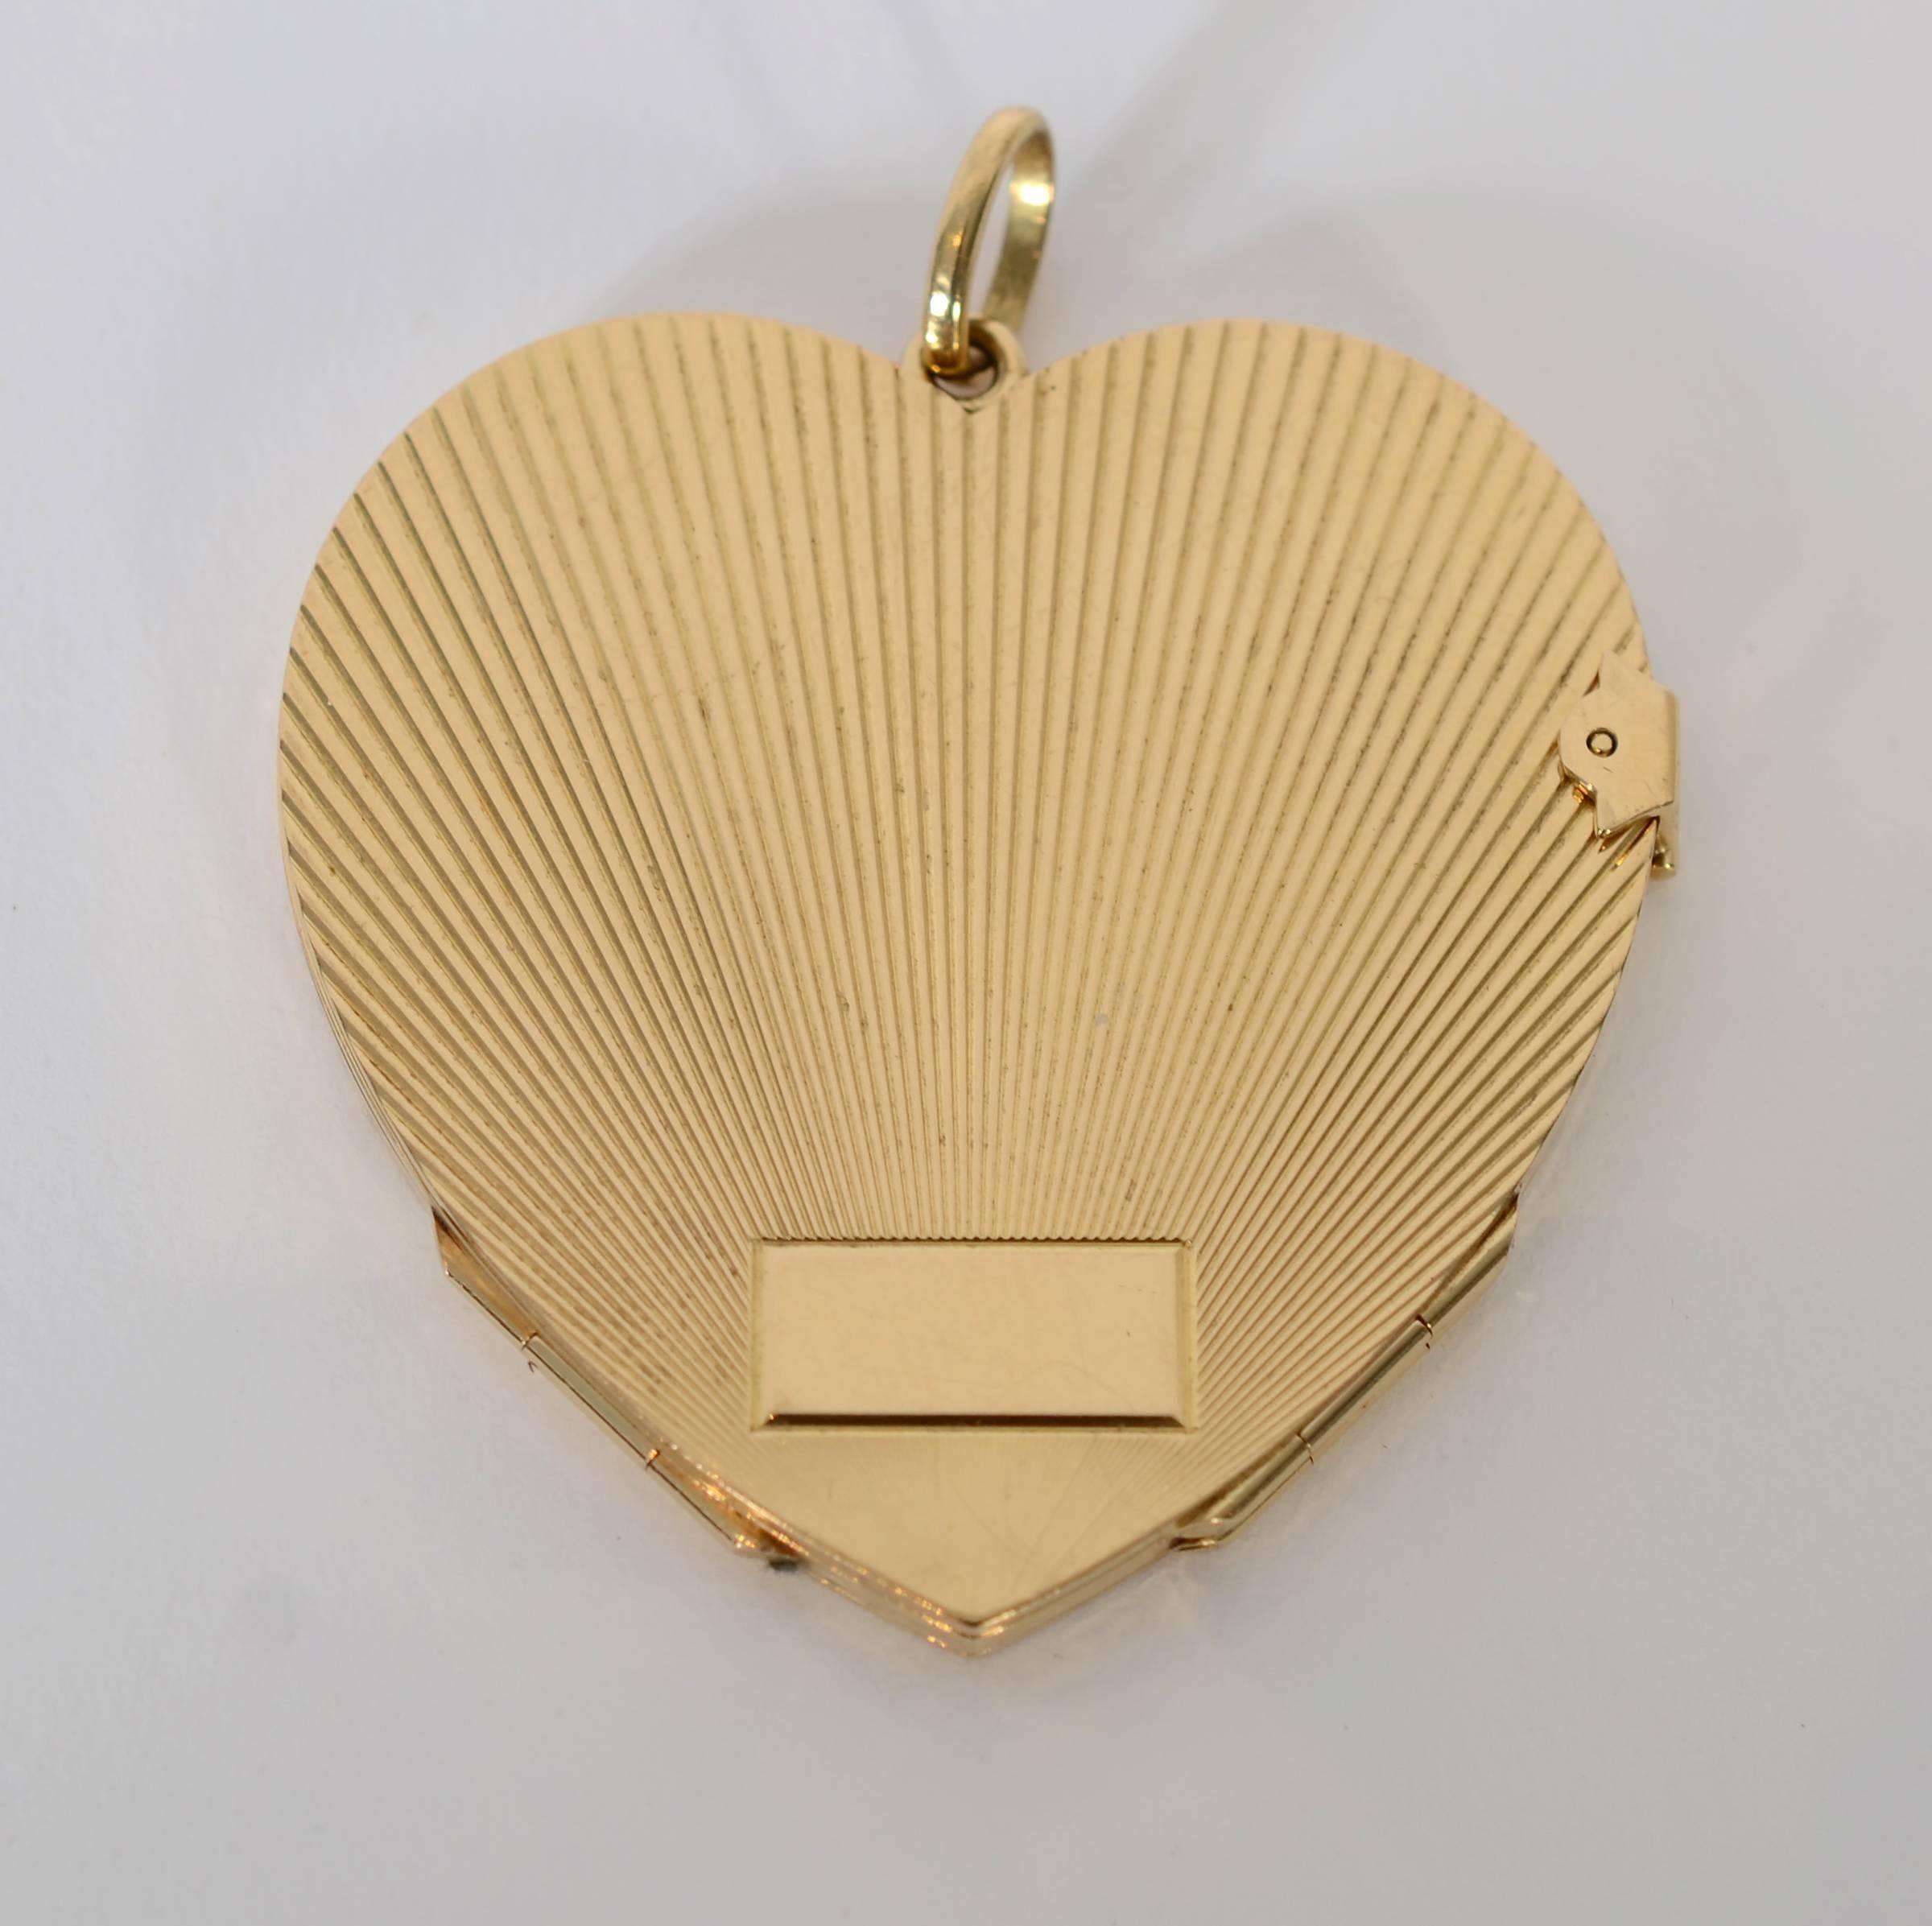 This 18 karat gold Retro heart locket is unusual in two ways. It is larger than most at 2 inches in length and width and it opens to four compartments rather than the usual two. The back has a rectangular plaque that can be engraved. Textured lines